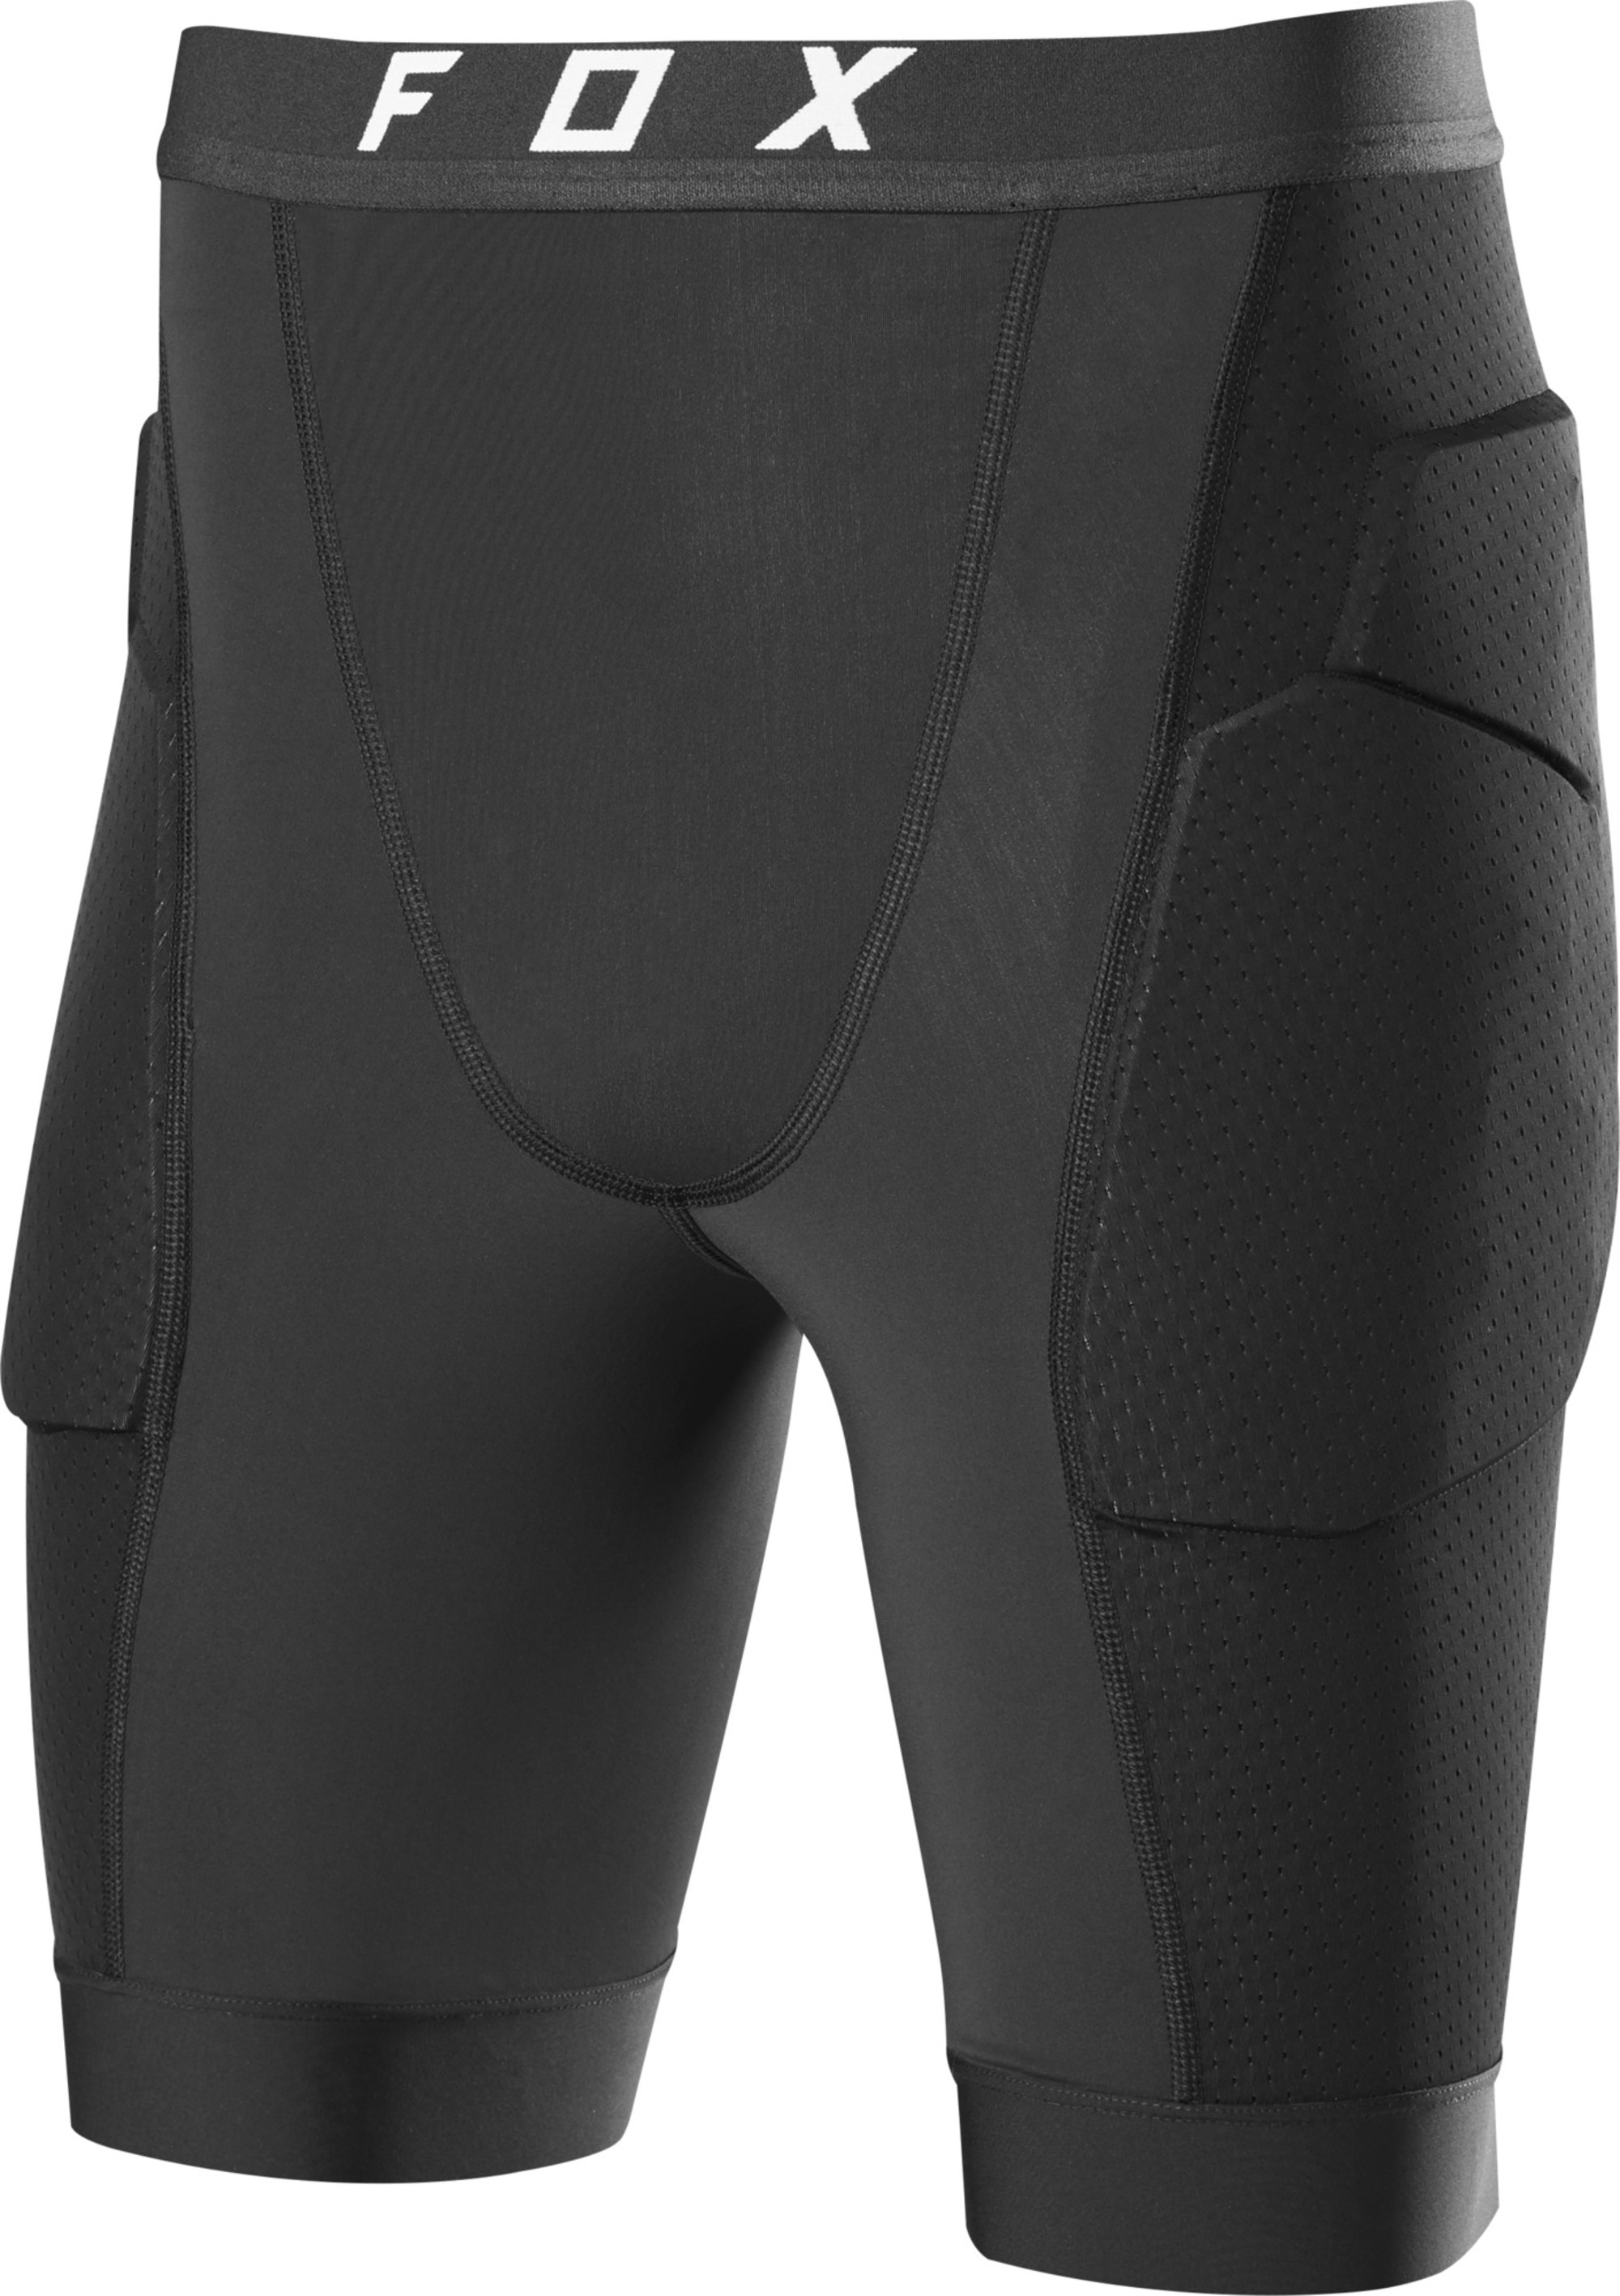 fox racing under protection protections for men baseframe pro short